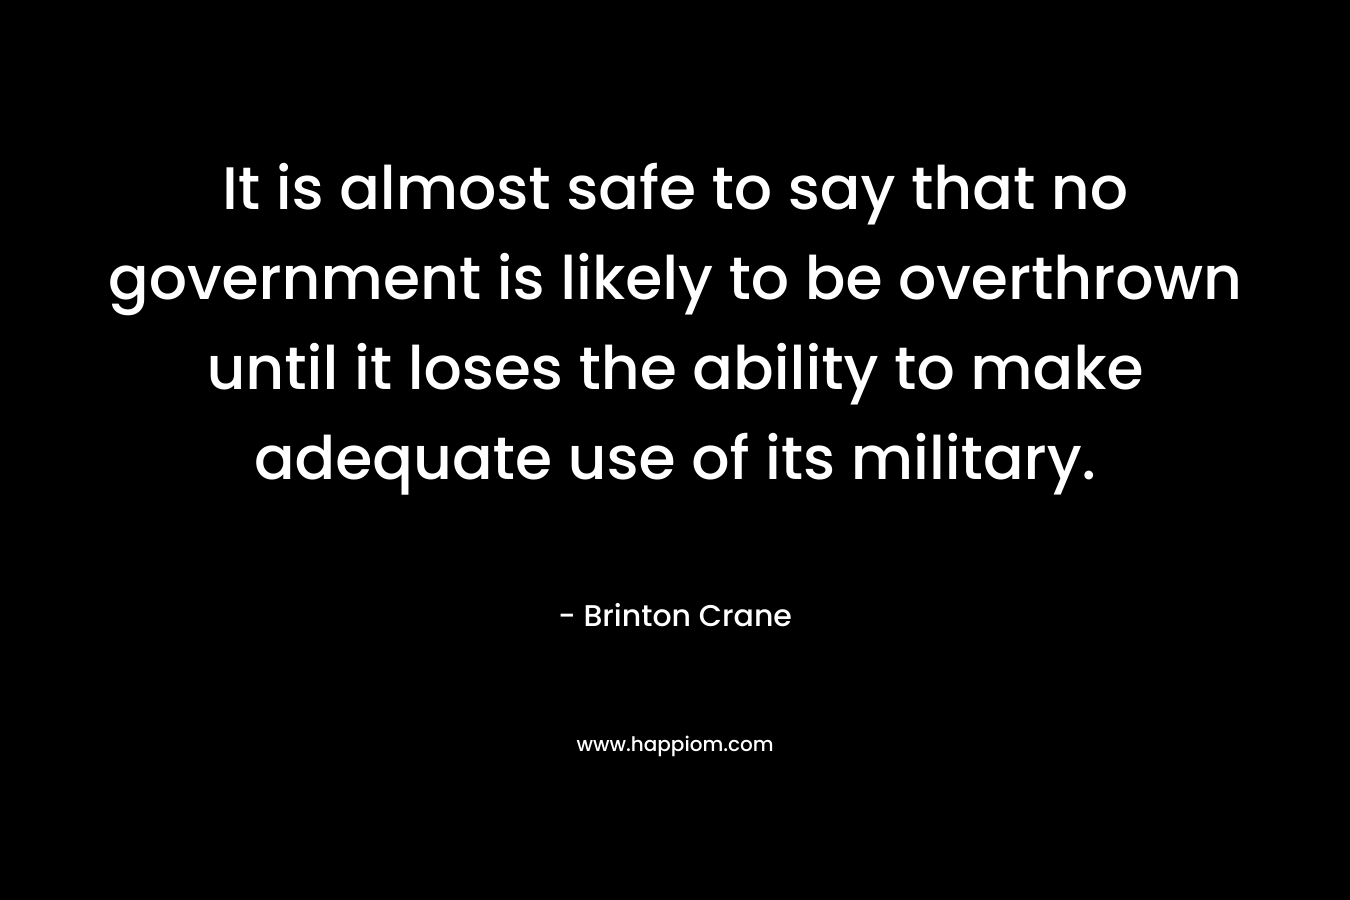 It is almost safe to say that no government is likely to be overthrown until it loses the ability to make adequate use of its military. – Brinton Crane